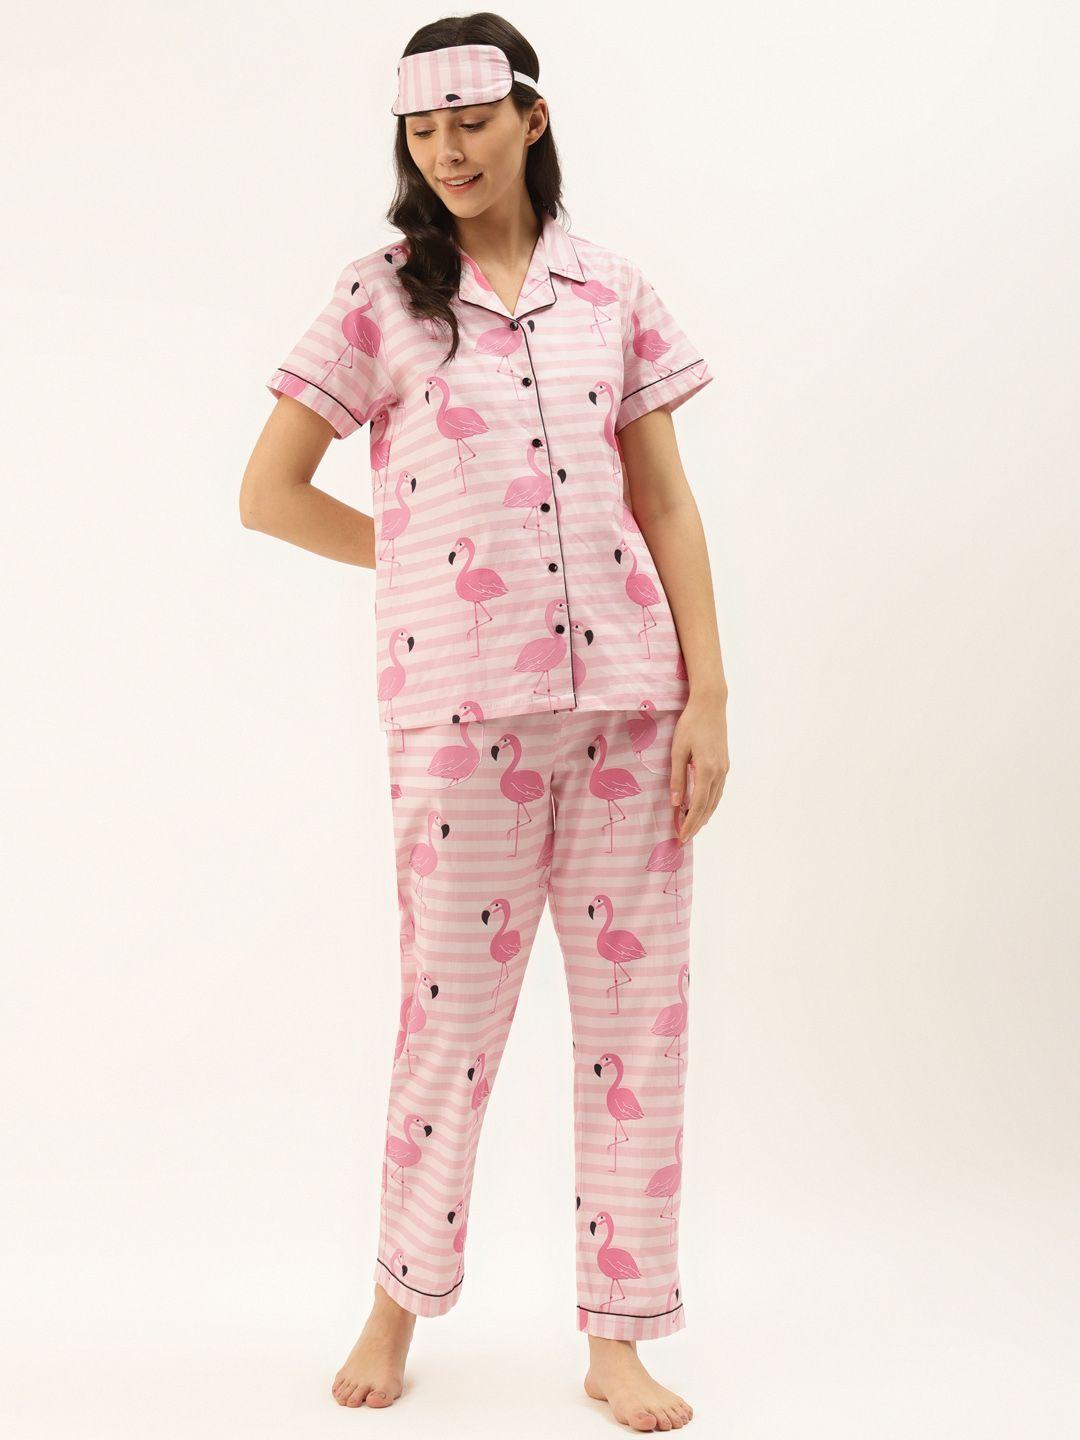 rapra-the-label-women-pink-flamingo-printed-pure-cotton-night-suit-with-eye-mask